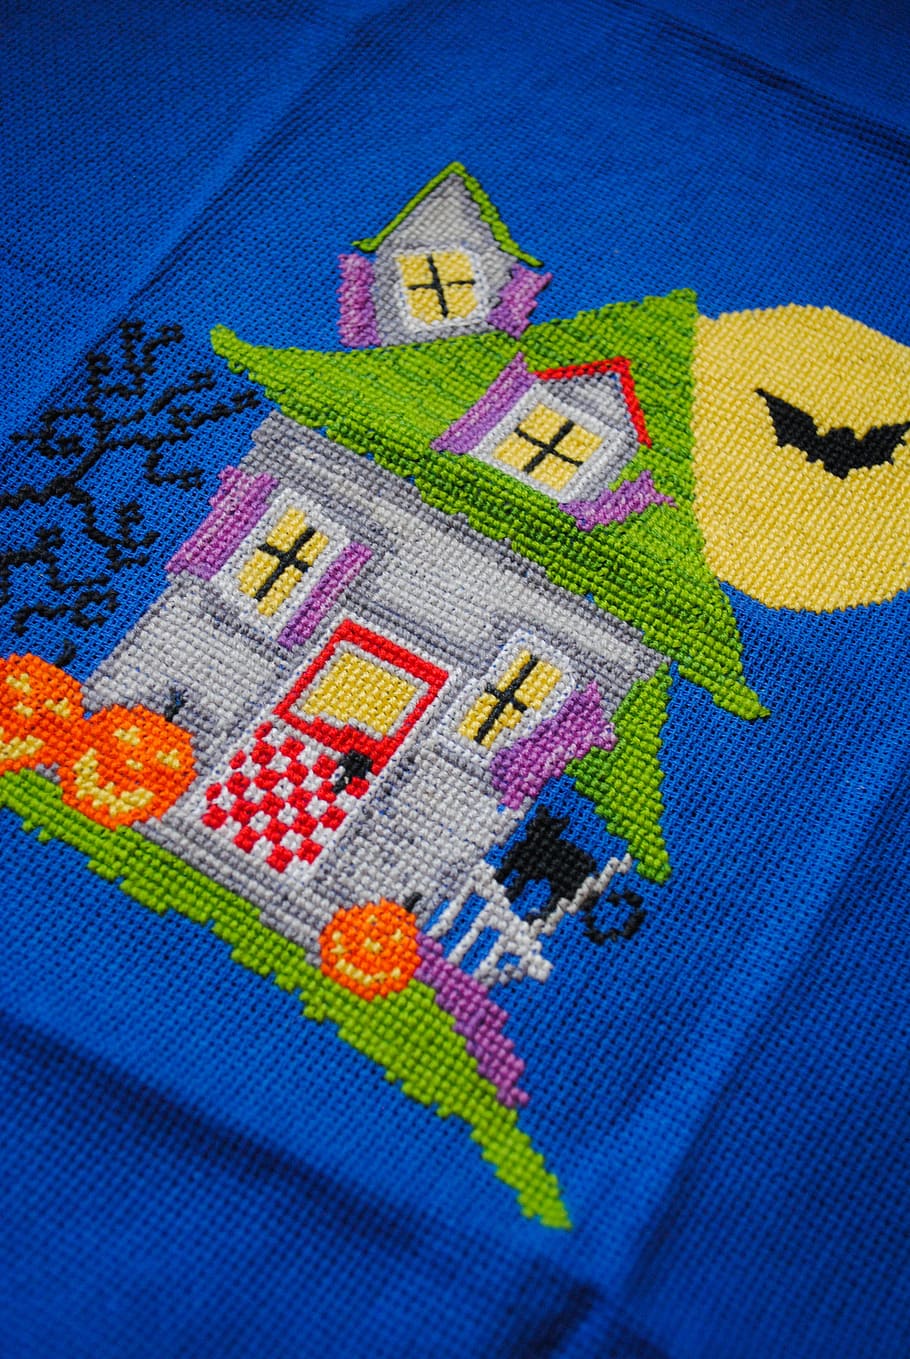 embroidery, bright, house, halloween, mansion, needlework, hobby, floss, handmade, multi colored